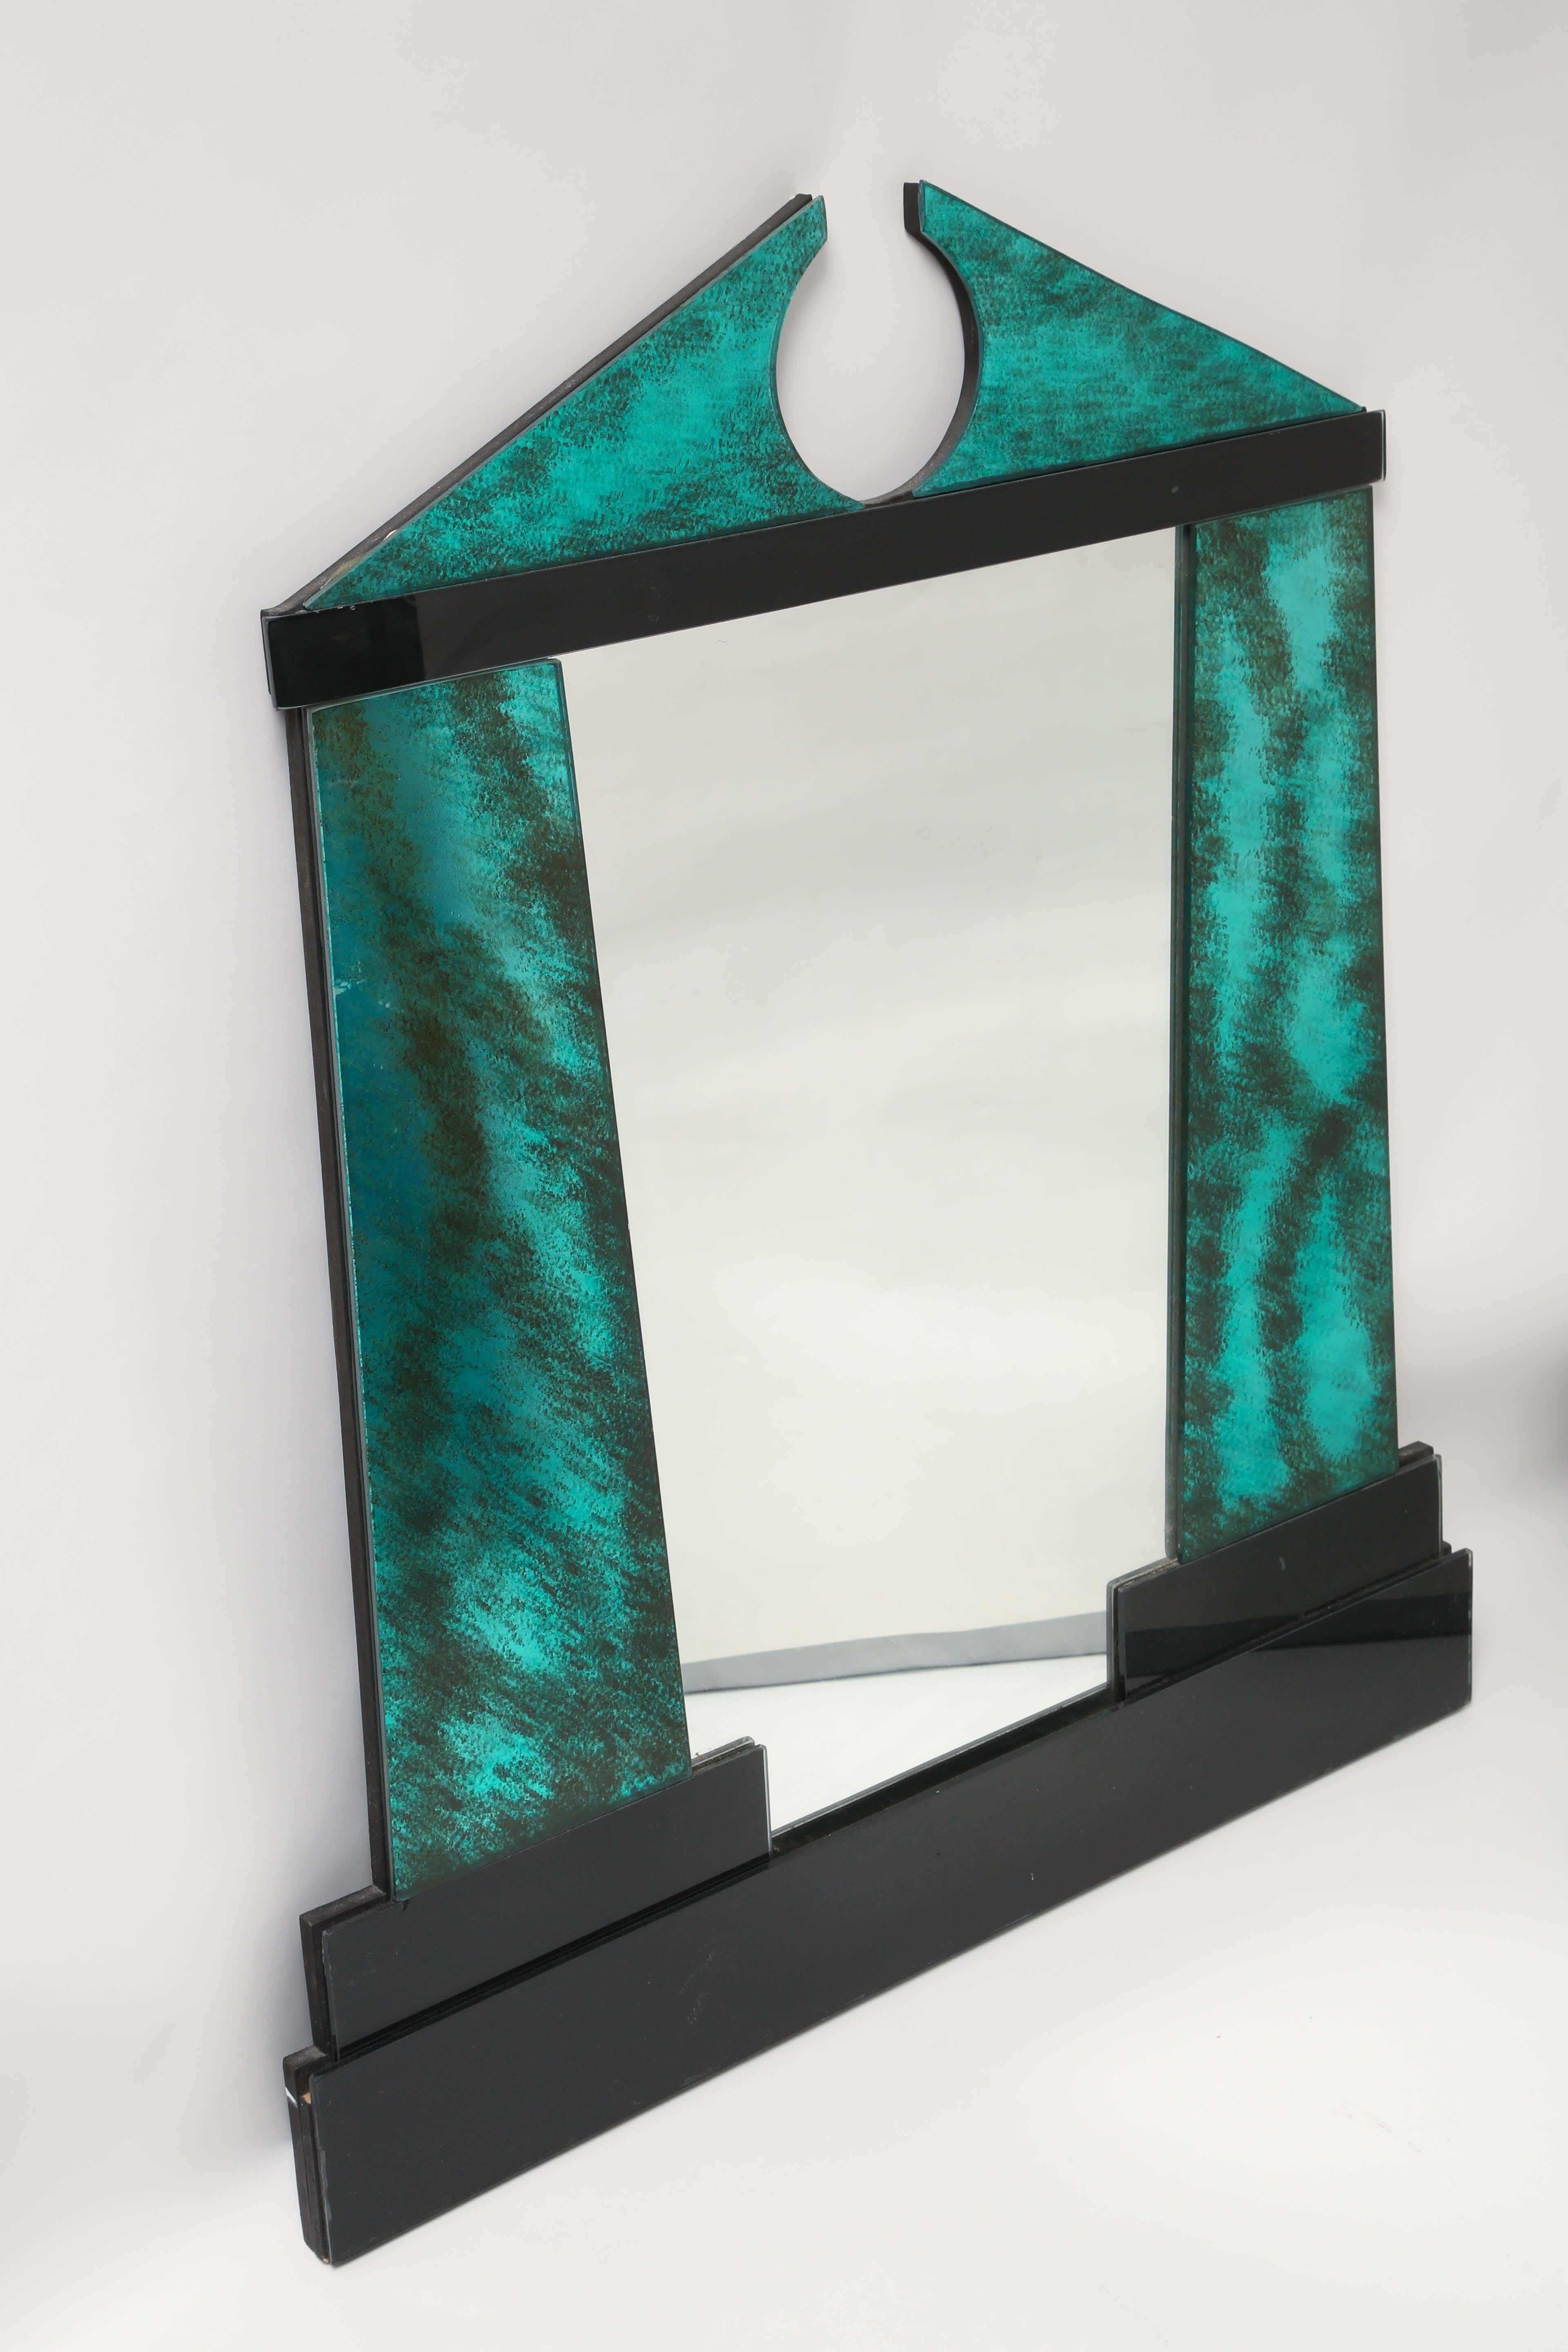 Elegant mirror created by David Marshall in which the glass is hand cut in centuries old tradition of stained glass. The mirror is hand polished and assembled to meet the standards of the sculptors guild. Done in a two-tone combination, faux